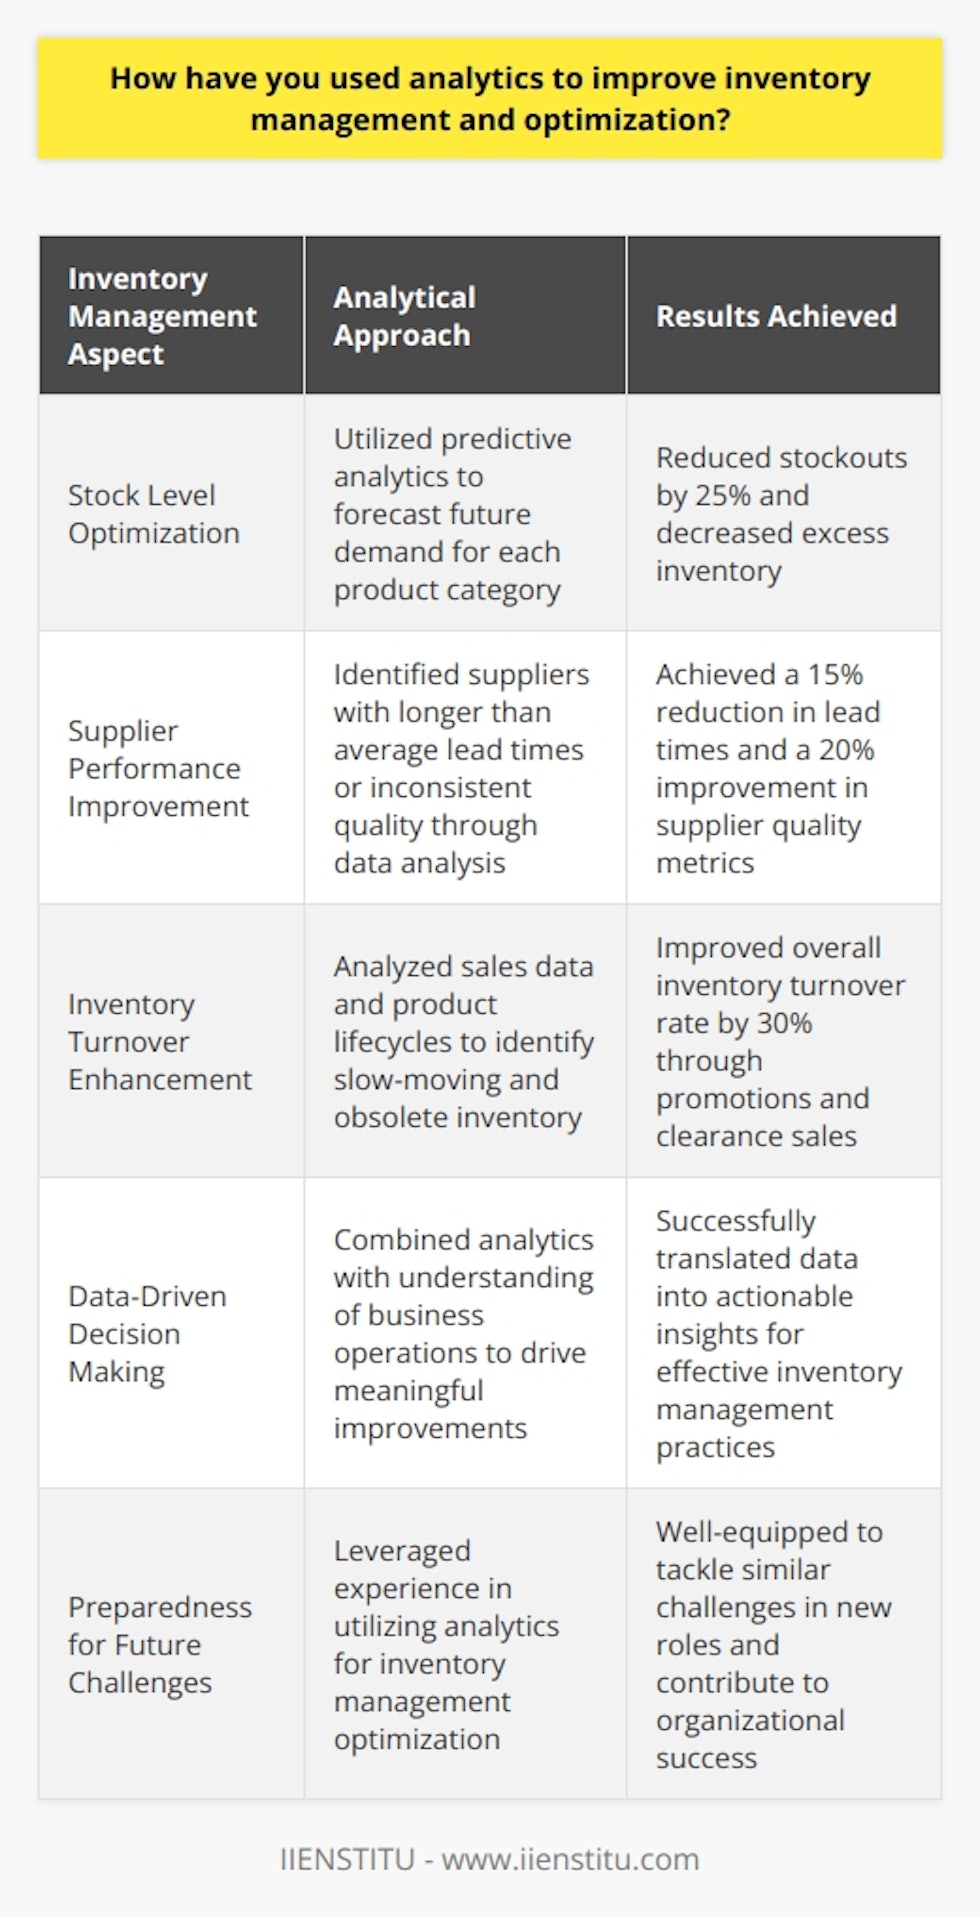 In my previous role as an inventory manager, I utilized analytics to significantly improve our inventory management processes. By collecting and analyzing data on sales trends, supplier lead times, and customer demand patterns, I was able to: Optimize Stock Levels I used predictive analytics to forecast future demand for each product category. This allowed me to adjust stock levels accordingly, ensuring we had the right products in the right quantities at the right time. As a result, we reduced stockouts by 25% while also decreasing excess inventory. Improve Supplier Performance Through data analysis, I identified suppliers with longer than average lead times or inconsistent quality. I worked closely with these suppliers to implement improvement plans, resulting in a 15% reduction in lead times and a 20% improvement in supplier quality metrics. Enhance Inventory Turnover By analyzing sales data and product lifecycles, I identified slow-moving and obsolete inventory. I developed strategies to liquidate this inventory through promotions and clearance sales, improving our overall inventory turnover rate by 30%. The key to my success was not just collecting data, but translating it into actionable insights. By combining analytics with my understanding of our business operations, I was able to drive meaningful improvements in our inventory management practices. I believe this experience has prepared me well to take on similar challenges in this role.